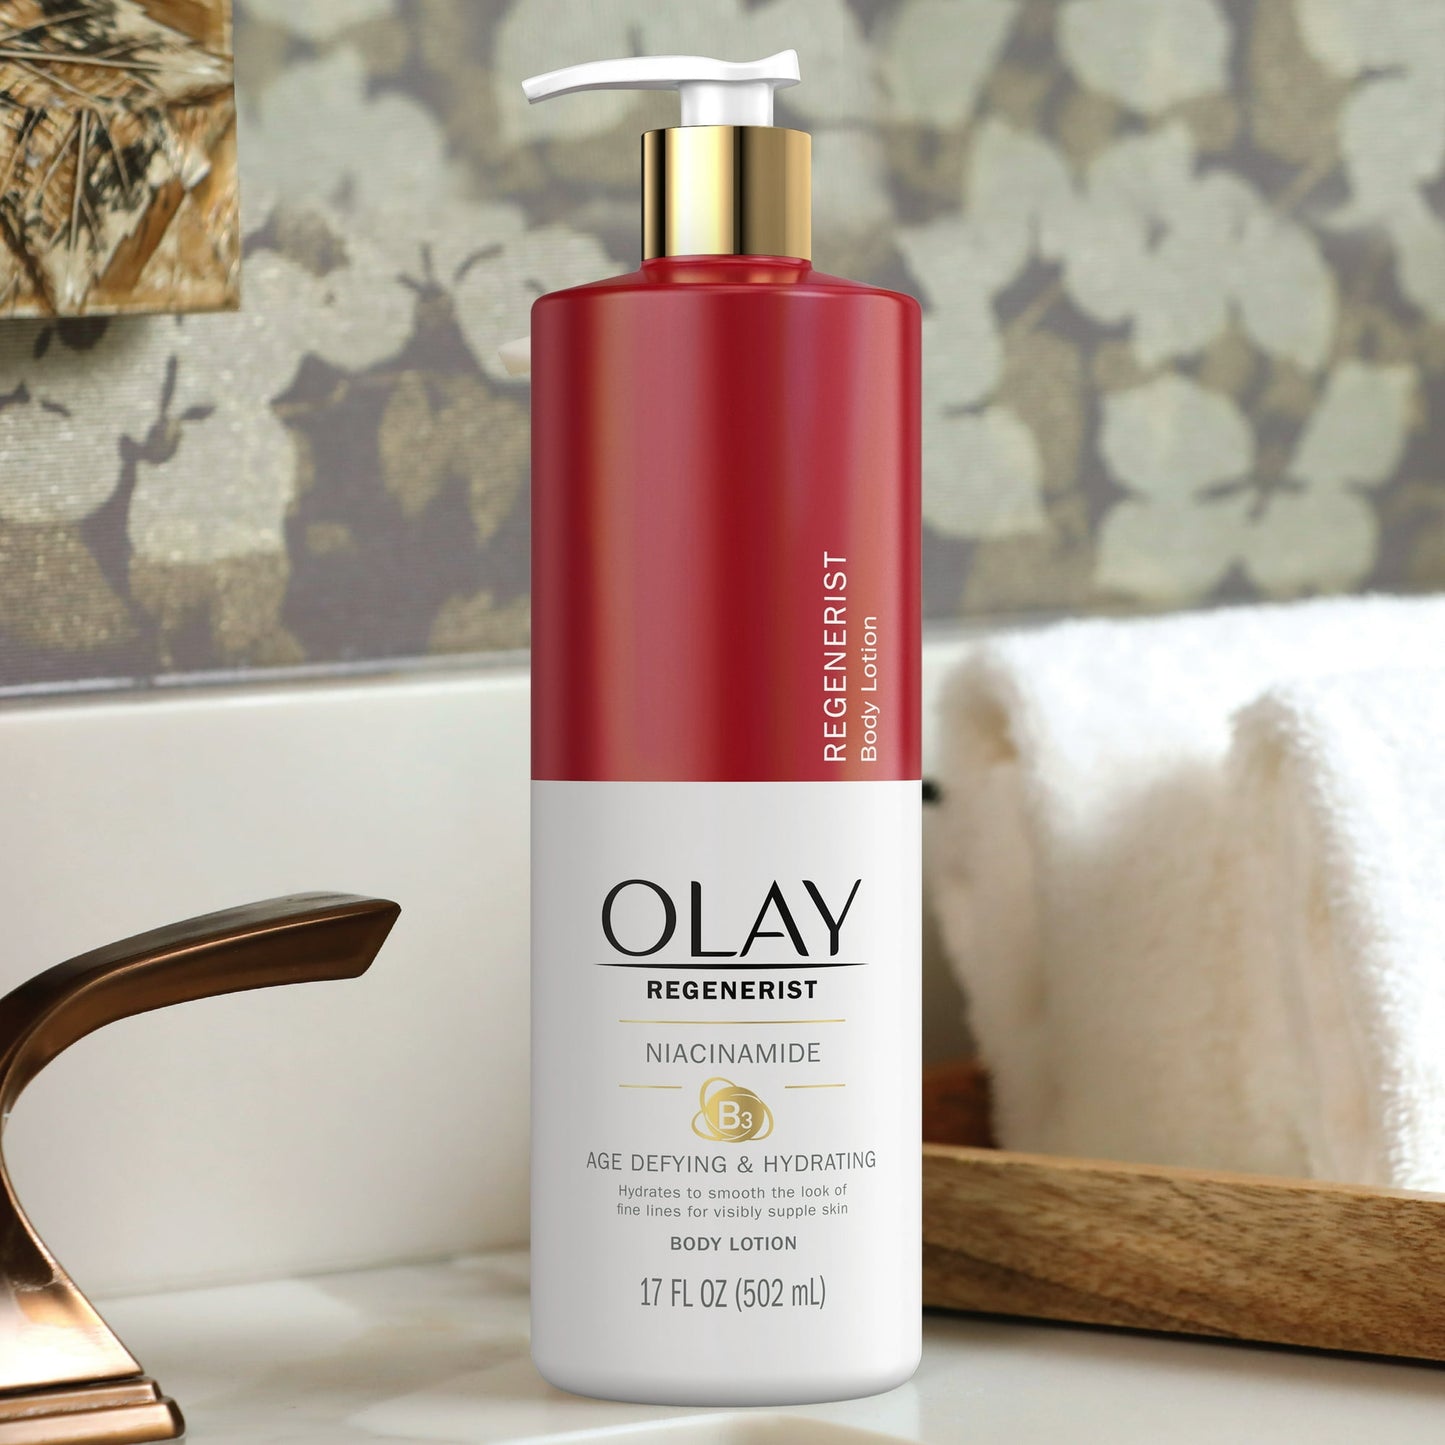 Olay Age Defying & Hydrating Niacinamide Hand and Body Lotion 17 fl oz.